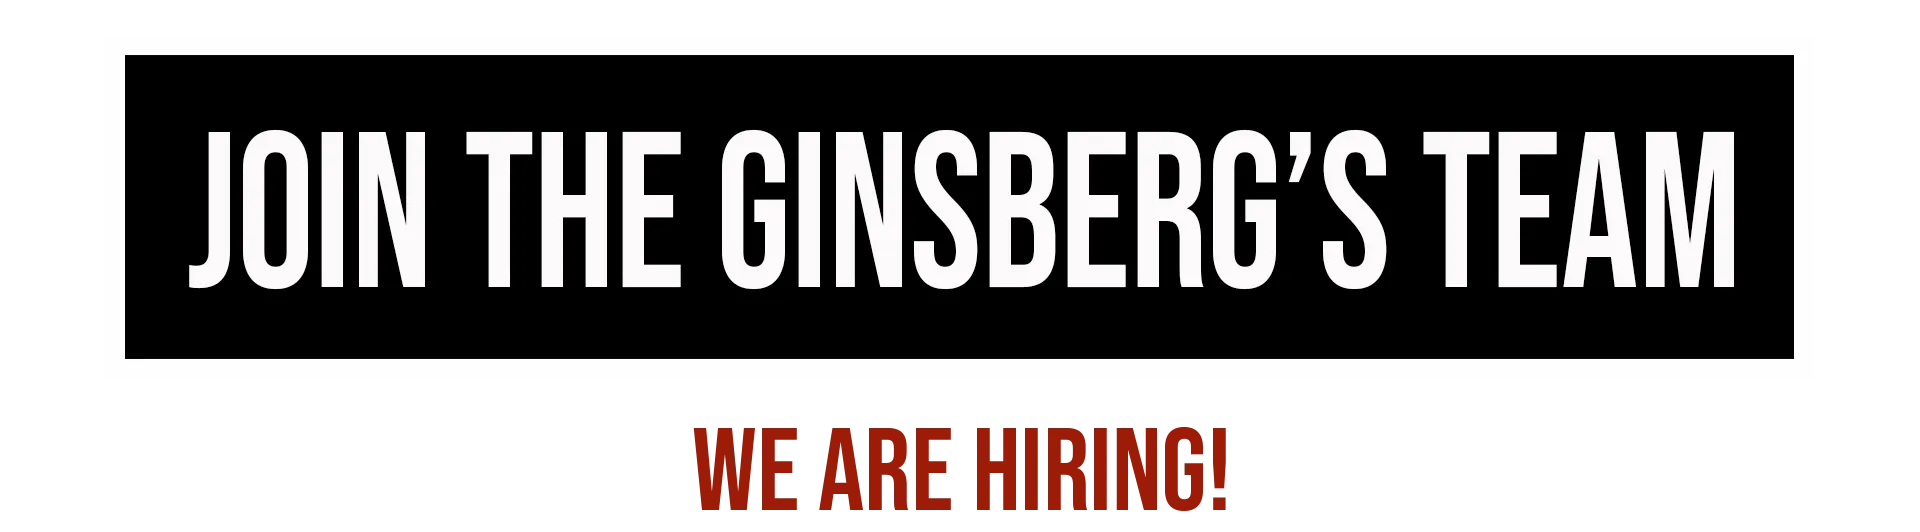 Ginsberg's is Hiring albany, poughkeepsie, east greenbush, troy jobs Careers for cdl drivers, warehouse, customer service, financial accountant, cdl a drivers, forklift operators, shift warehouse workers and more